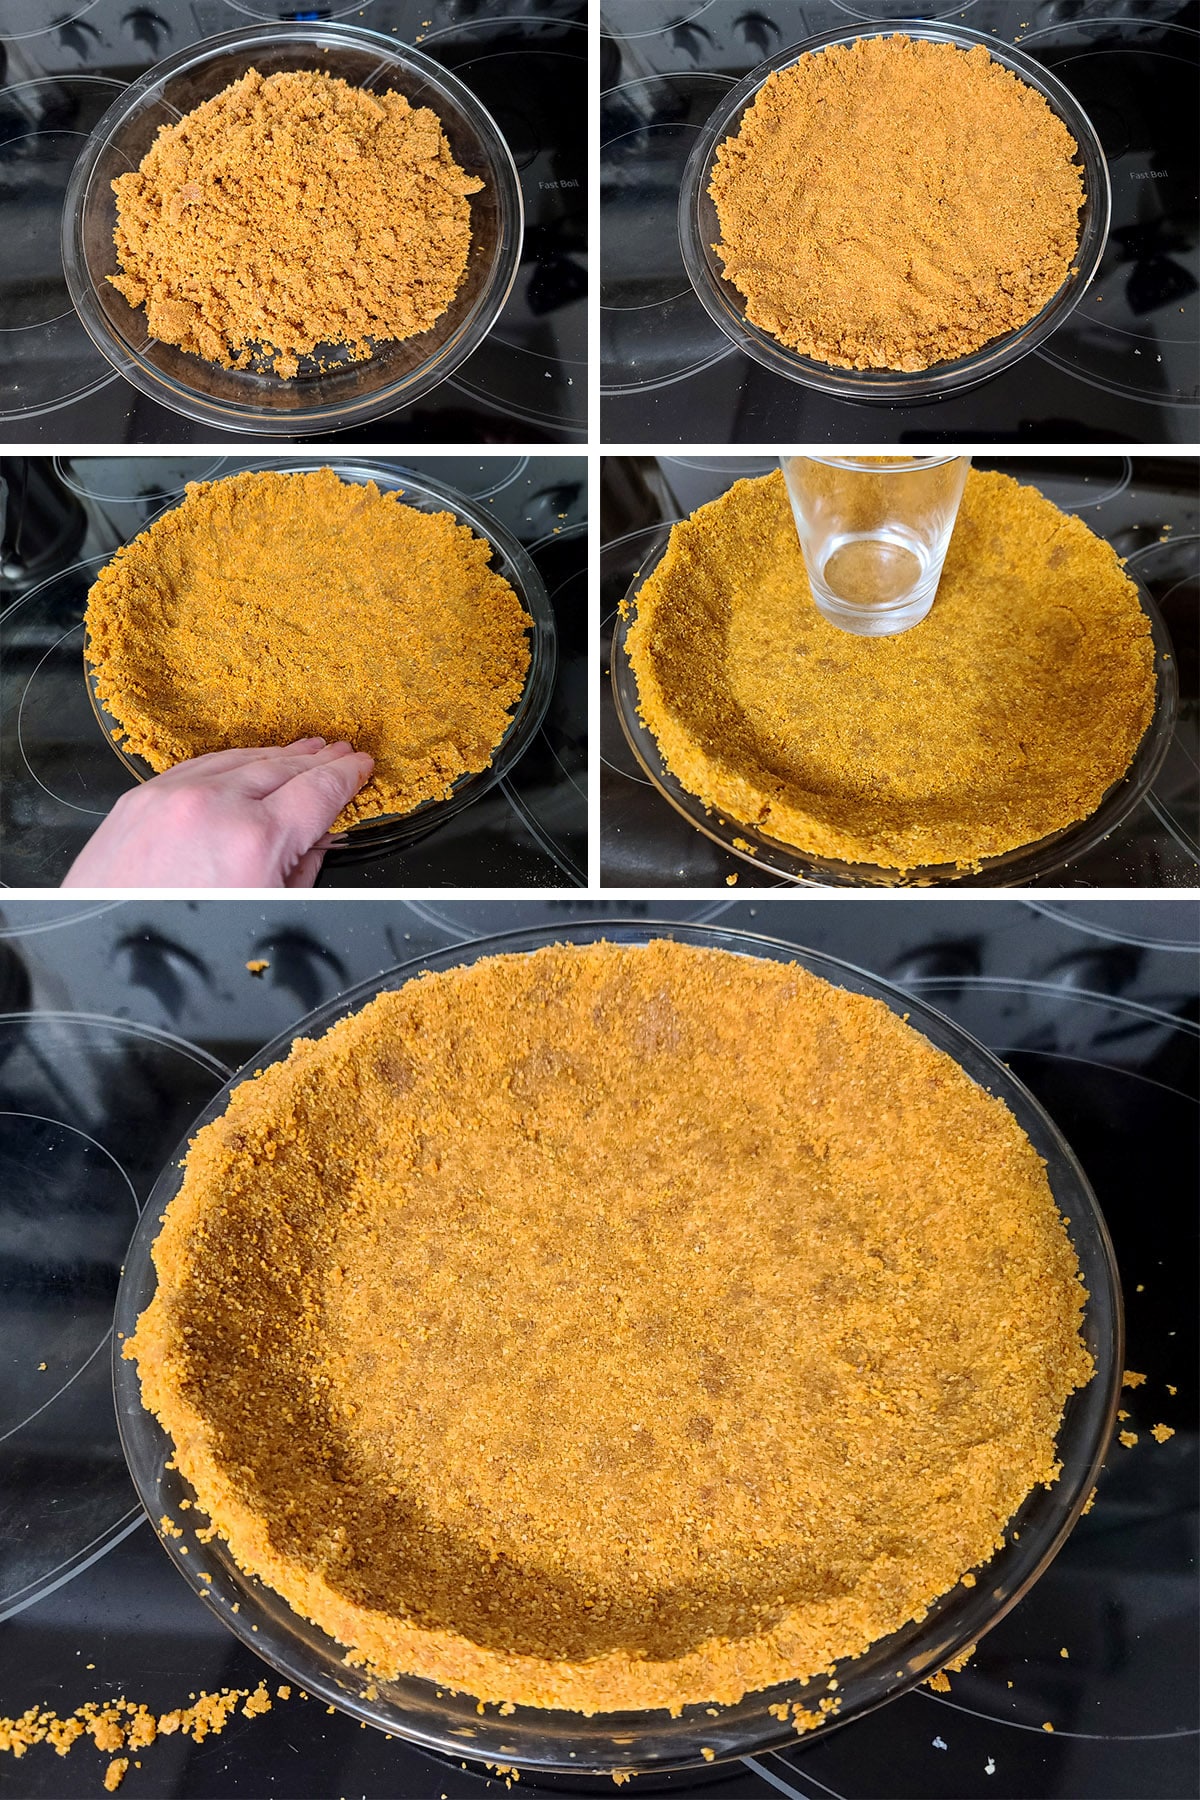 A 5 part image showing the graham cracker crumb crust being spread and pressed into a pie plate to form the crust.